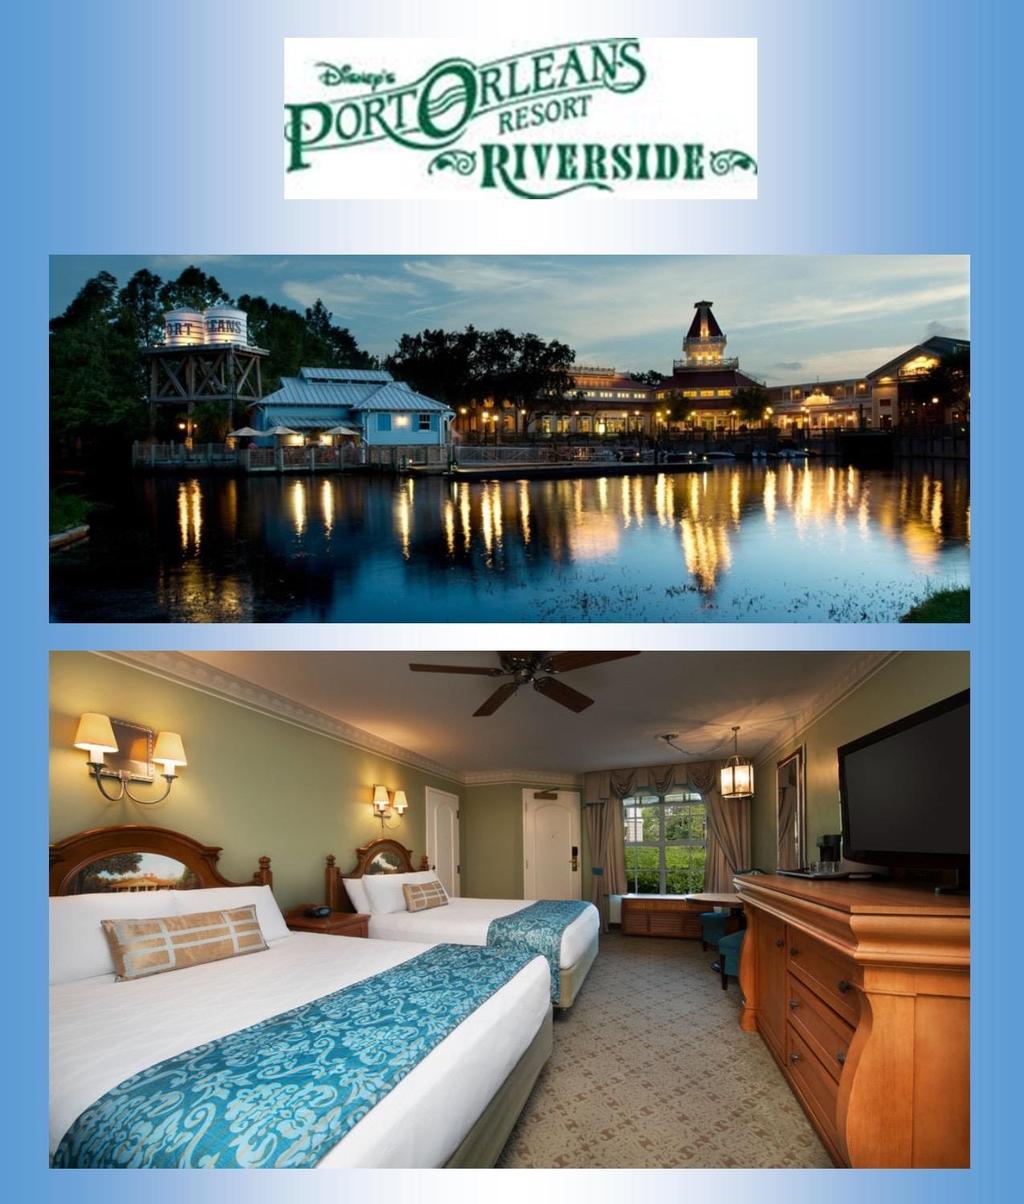 LODGING Dancers and families will be hosted at Disney s Port Orleans Riverside Resort.